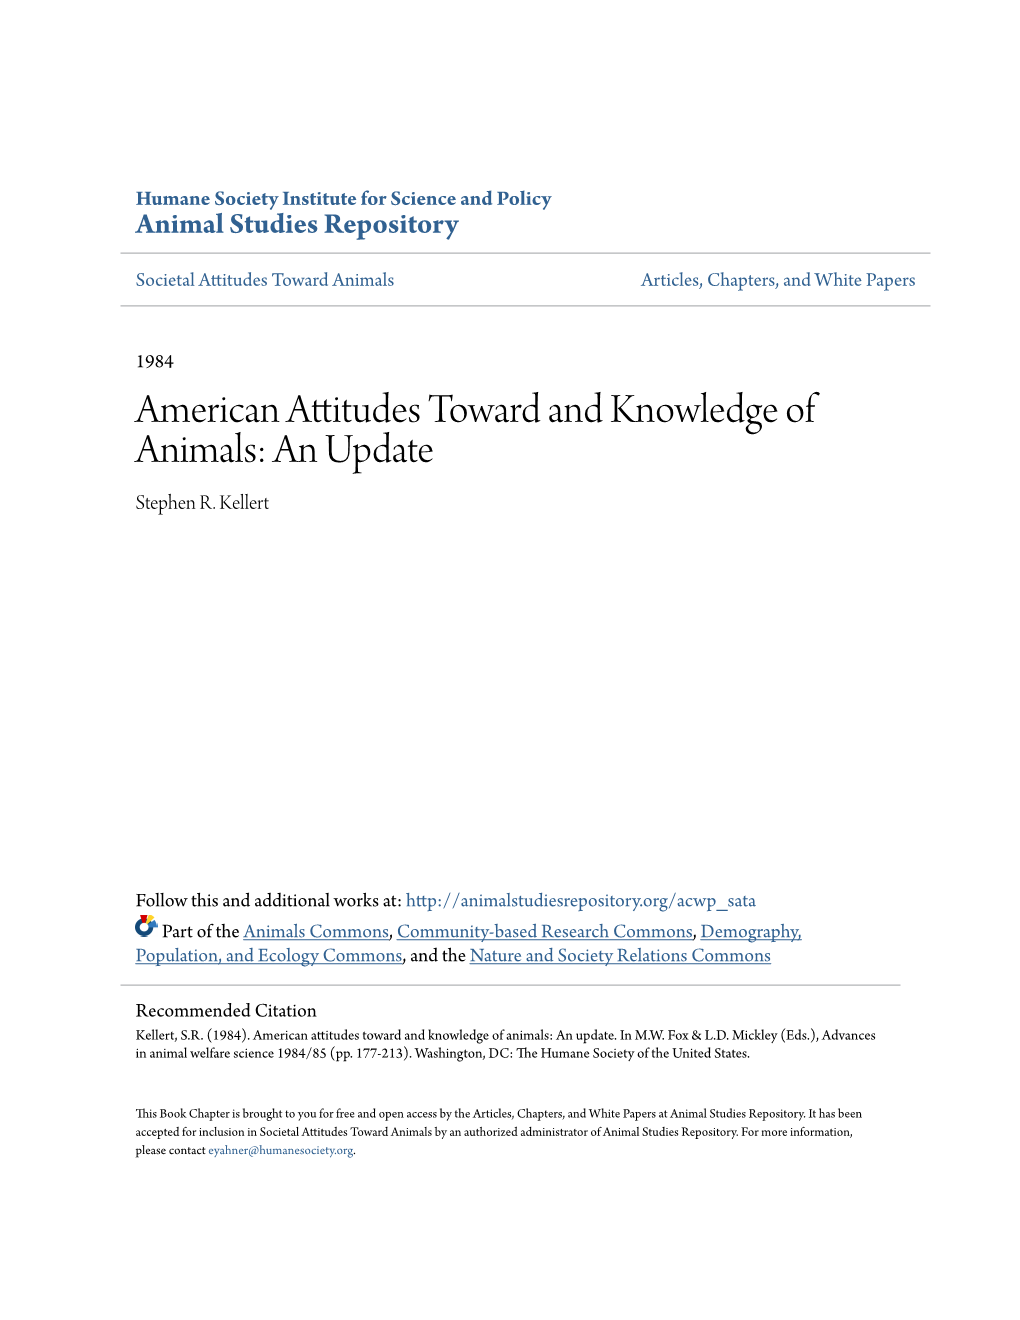 American Attitudes Toward and Knowledge of Animals: an Update Stephen R